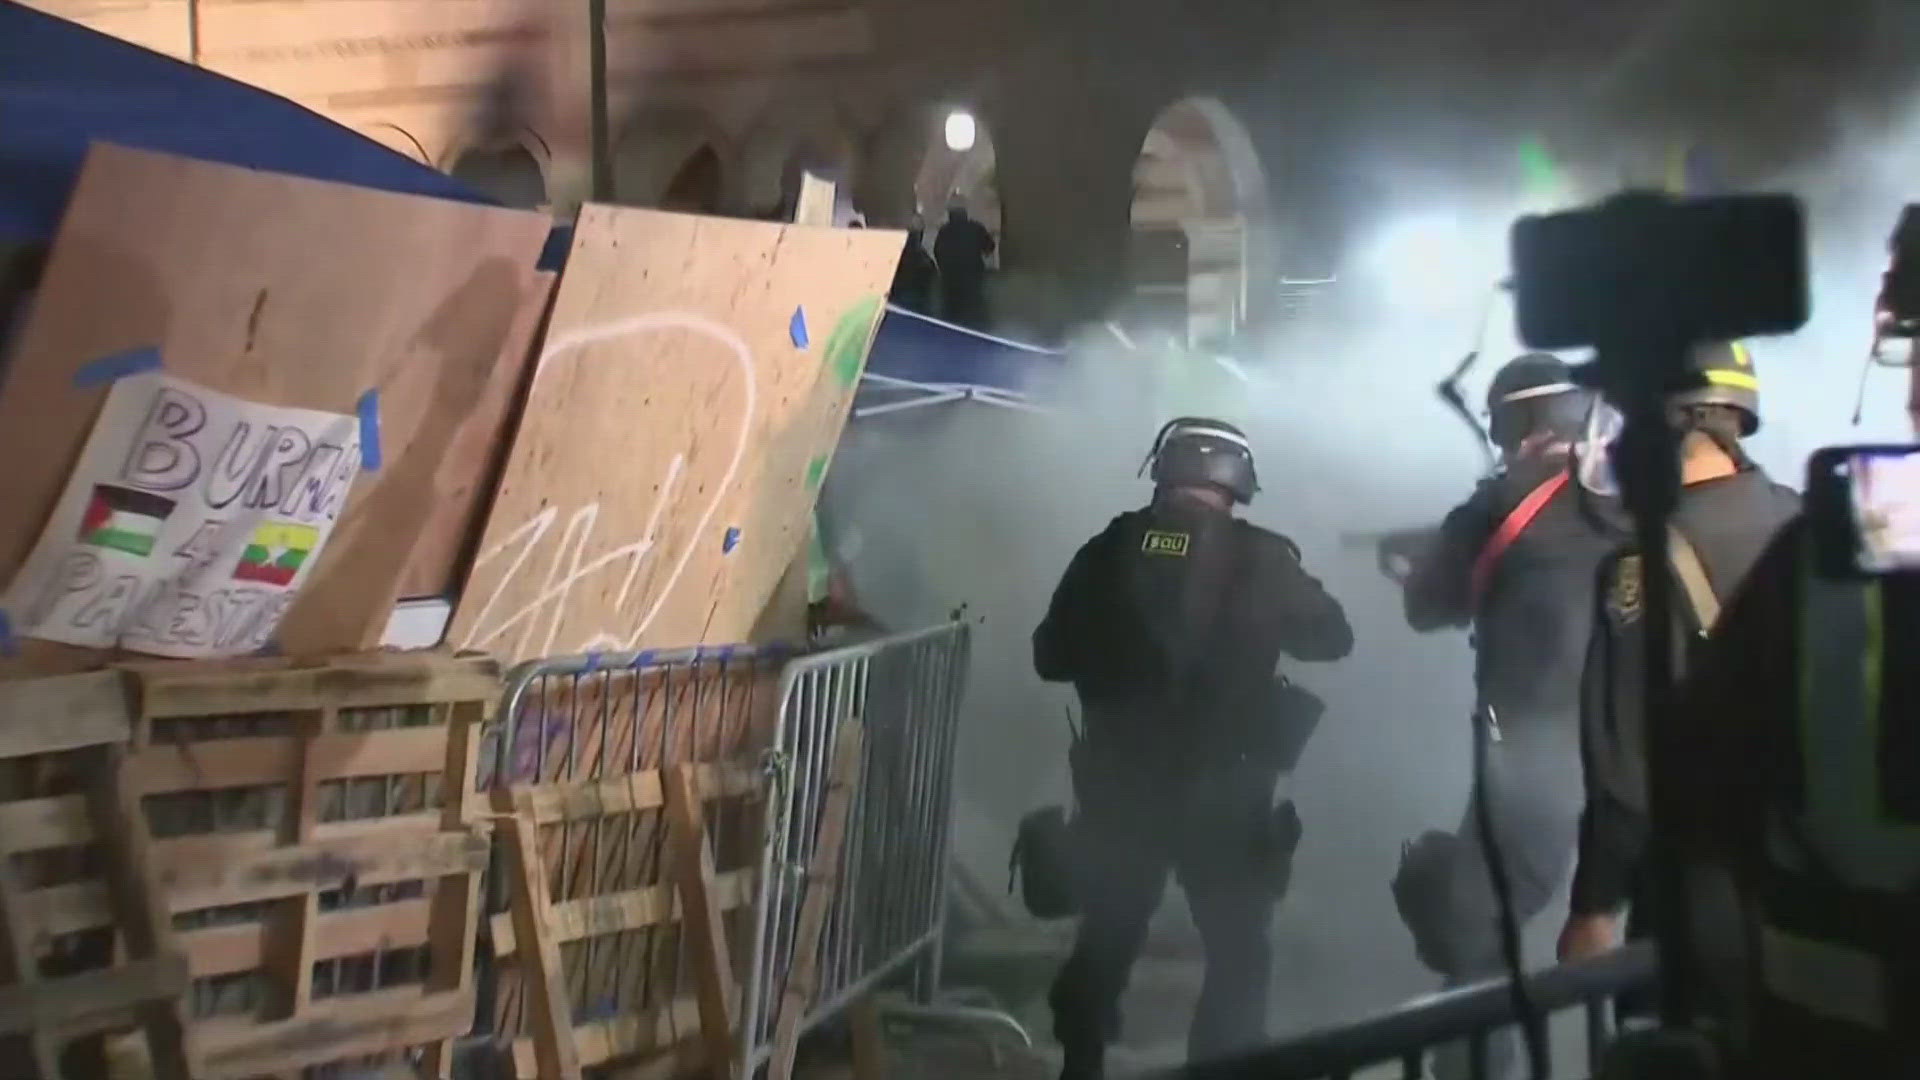 Protests at UCLA in particular have grown in intensity, as officers with riot gear worked to disperse crowds.